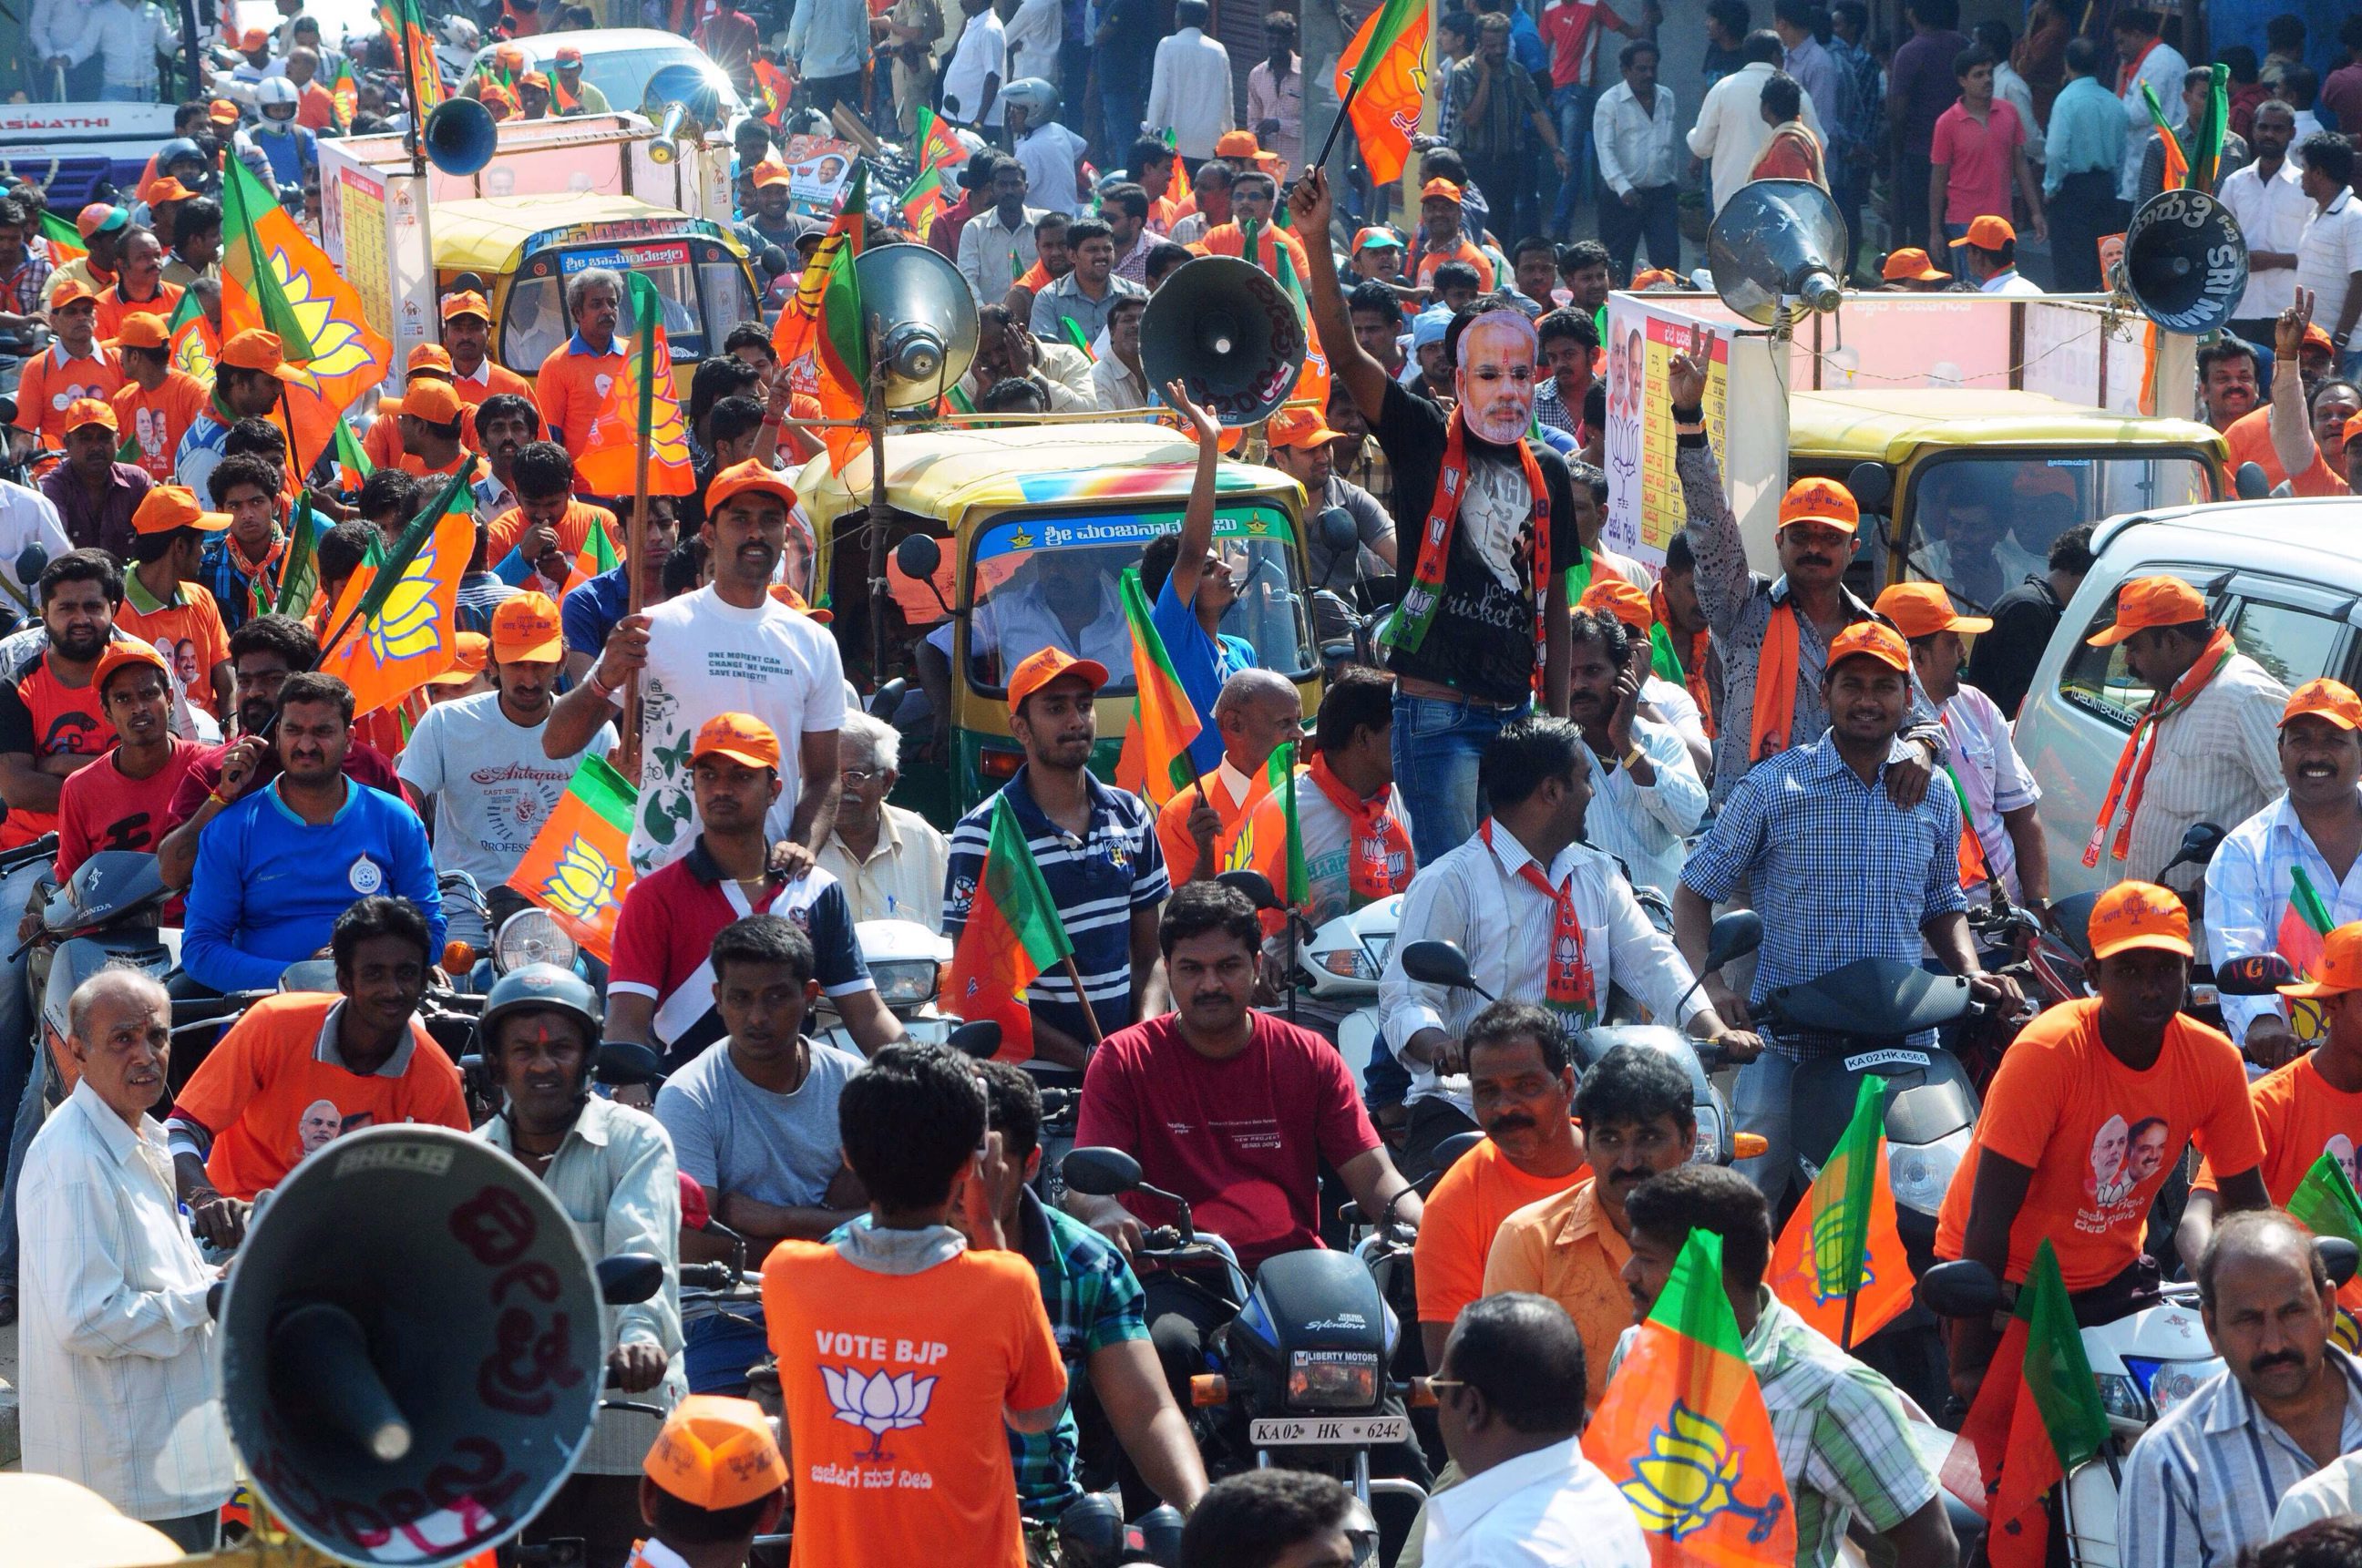 BJP candidate campaign for Lok Sabha Election in Bangalore, India. Image Courtesy: scmp.com